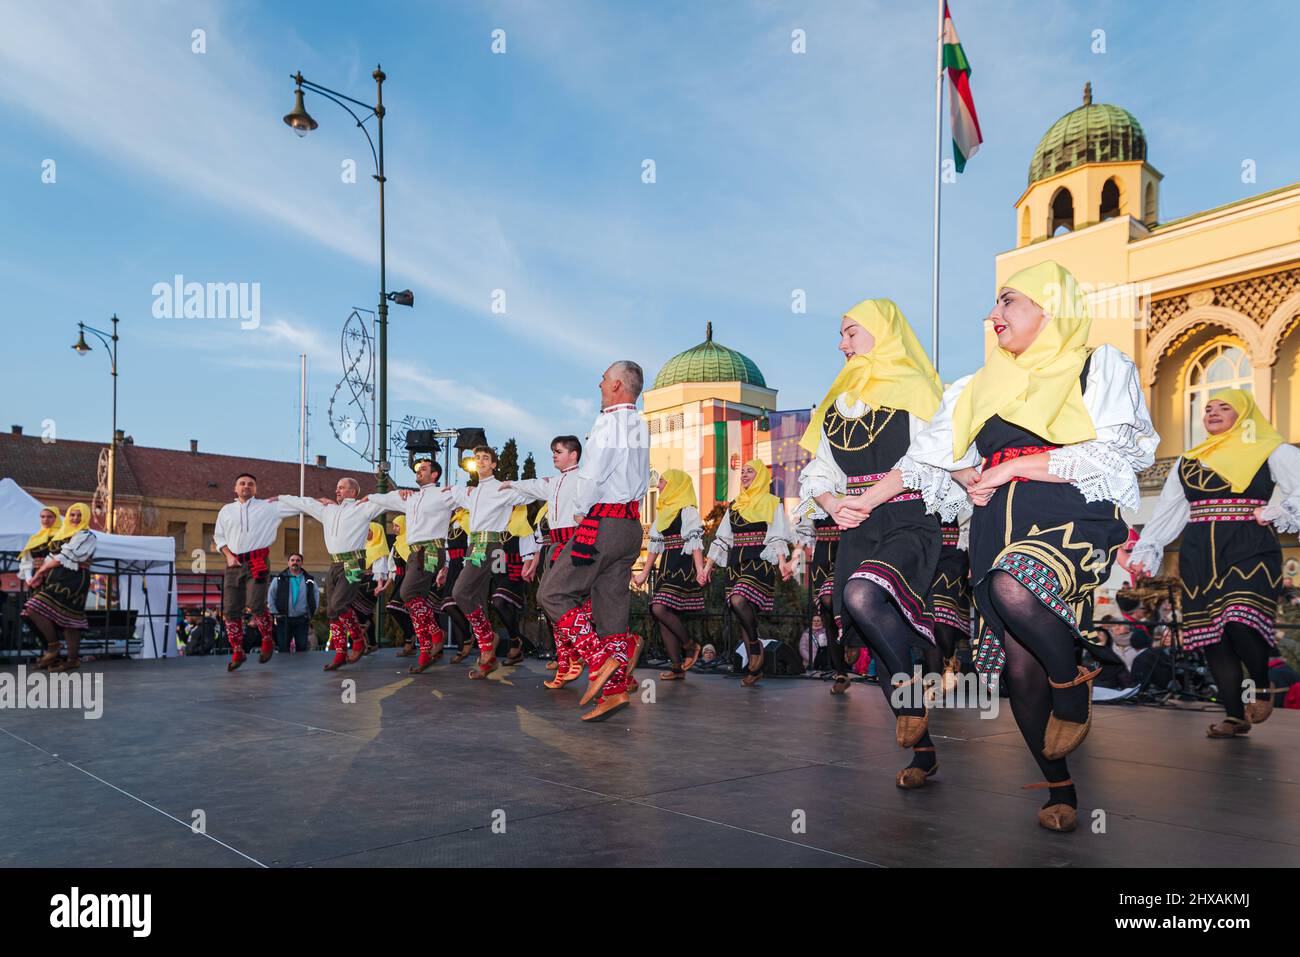 02.28.2022. Mohacs hungary. carnival festival when the winter is ending. Preformers wearing Traditional clotes and masks. They are dancing, walking, Stock Photo